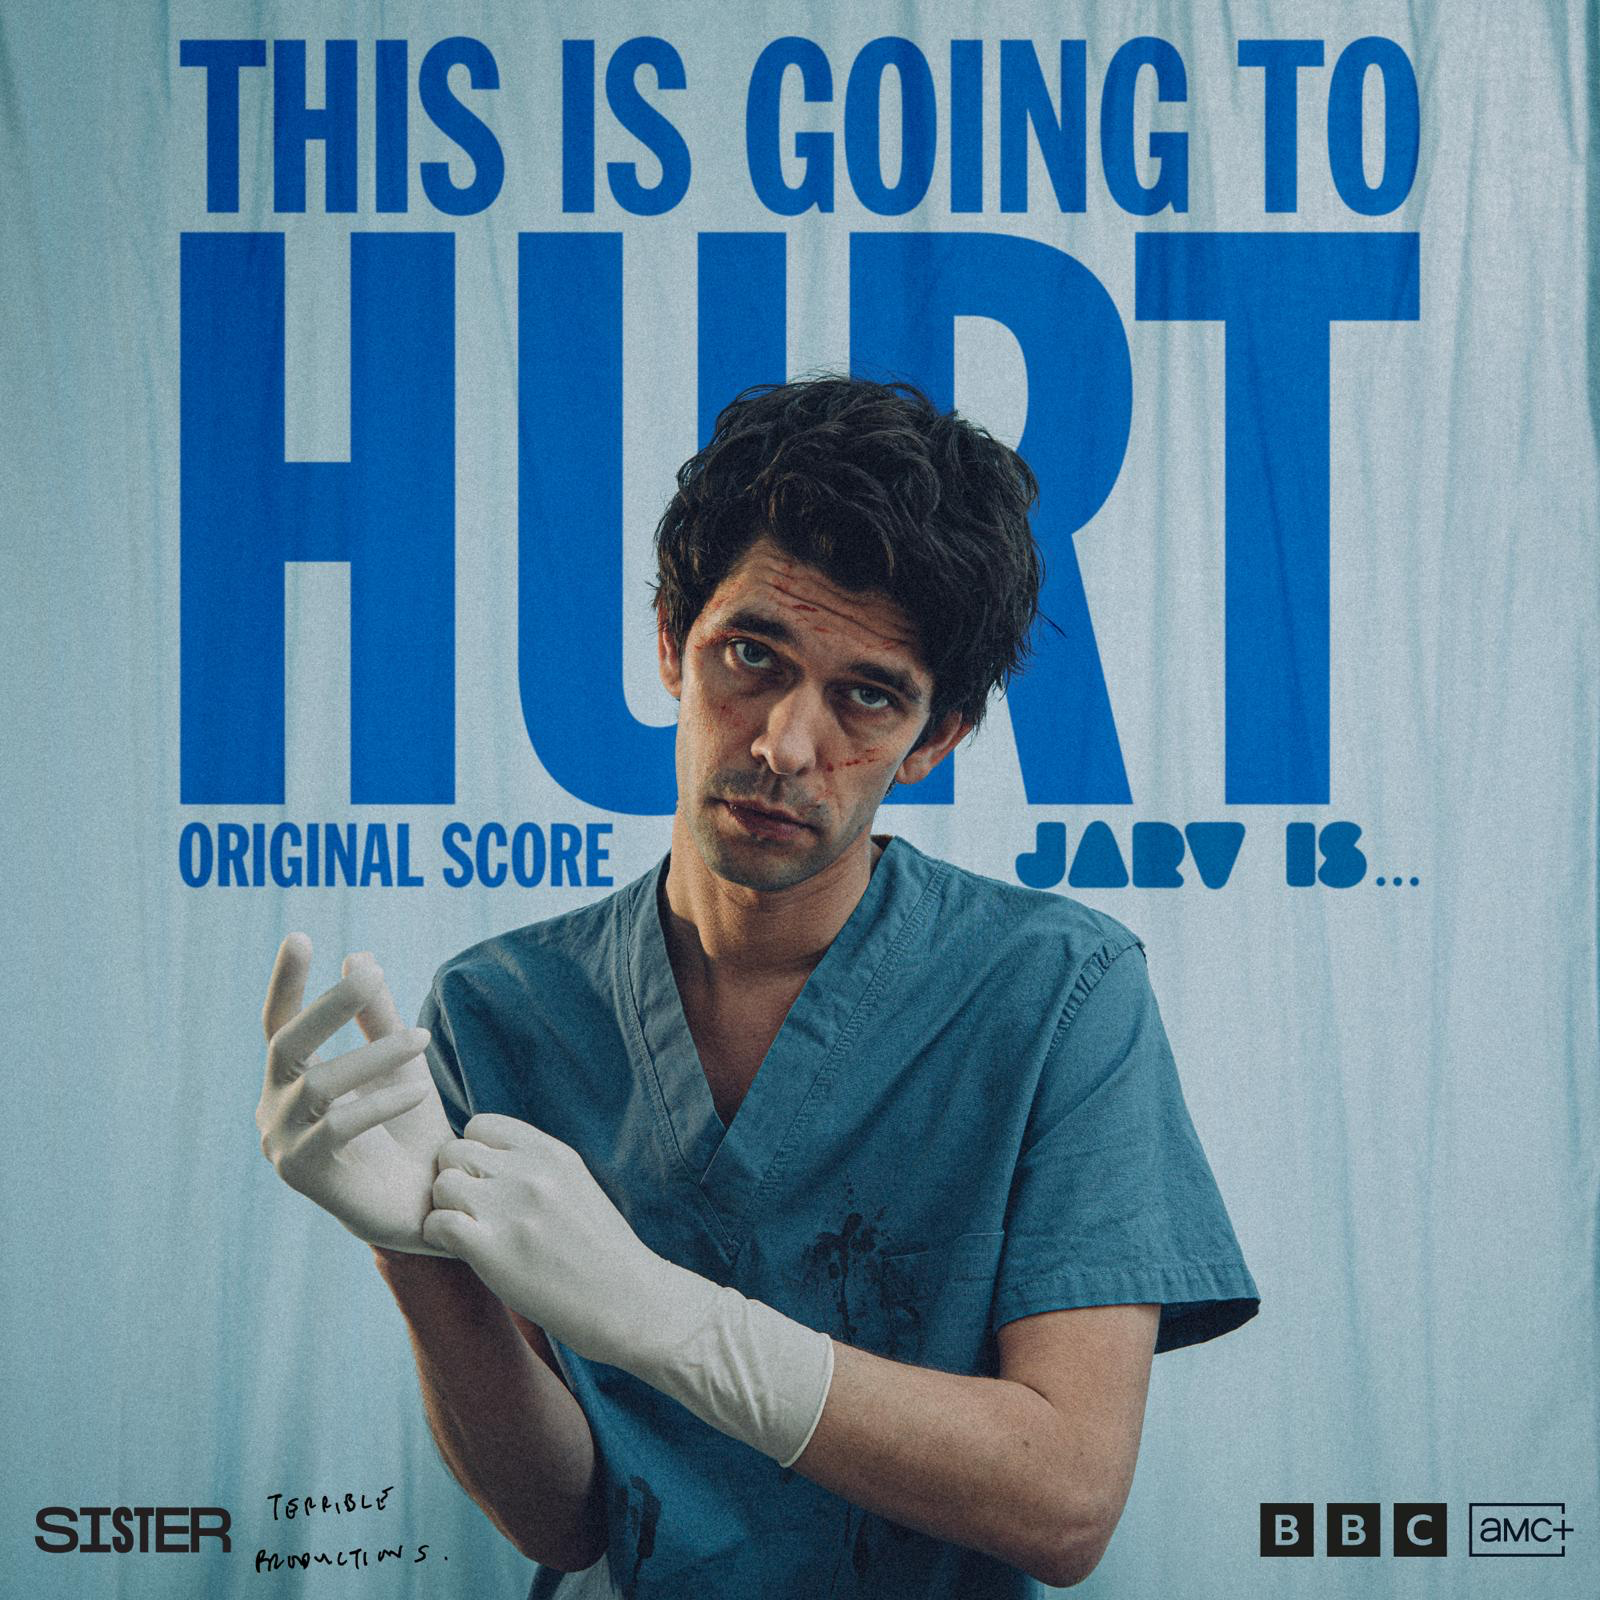 JARV IS... - This Is Going To Hurt (Original Sou